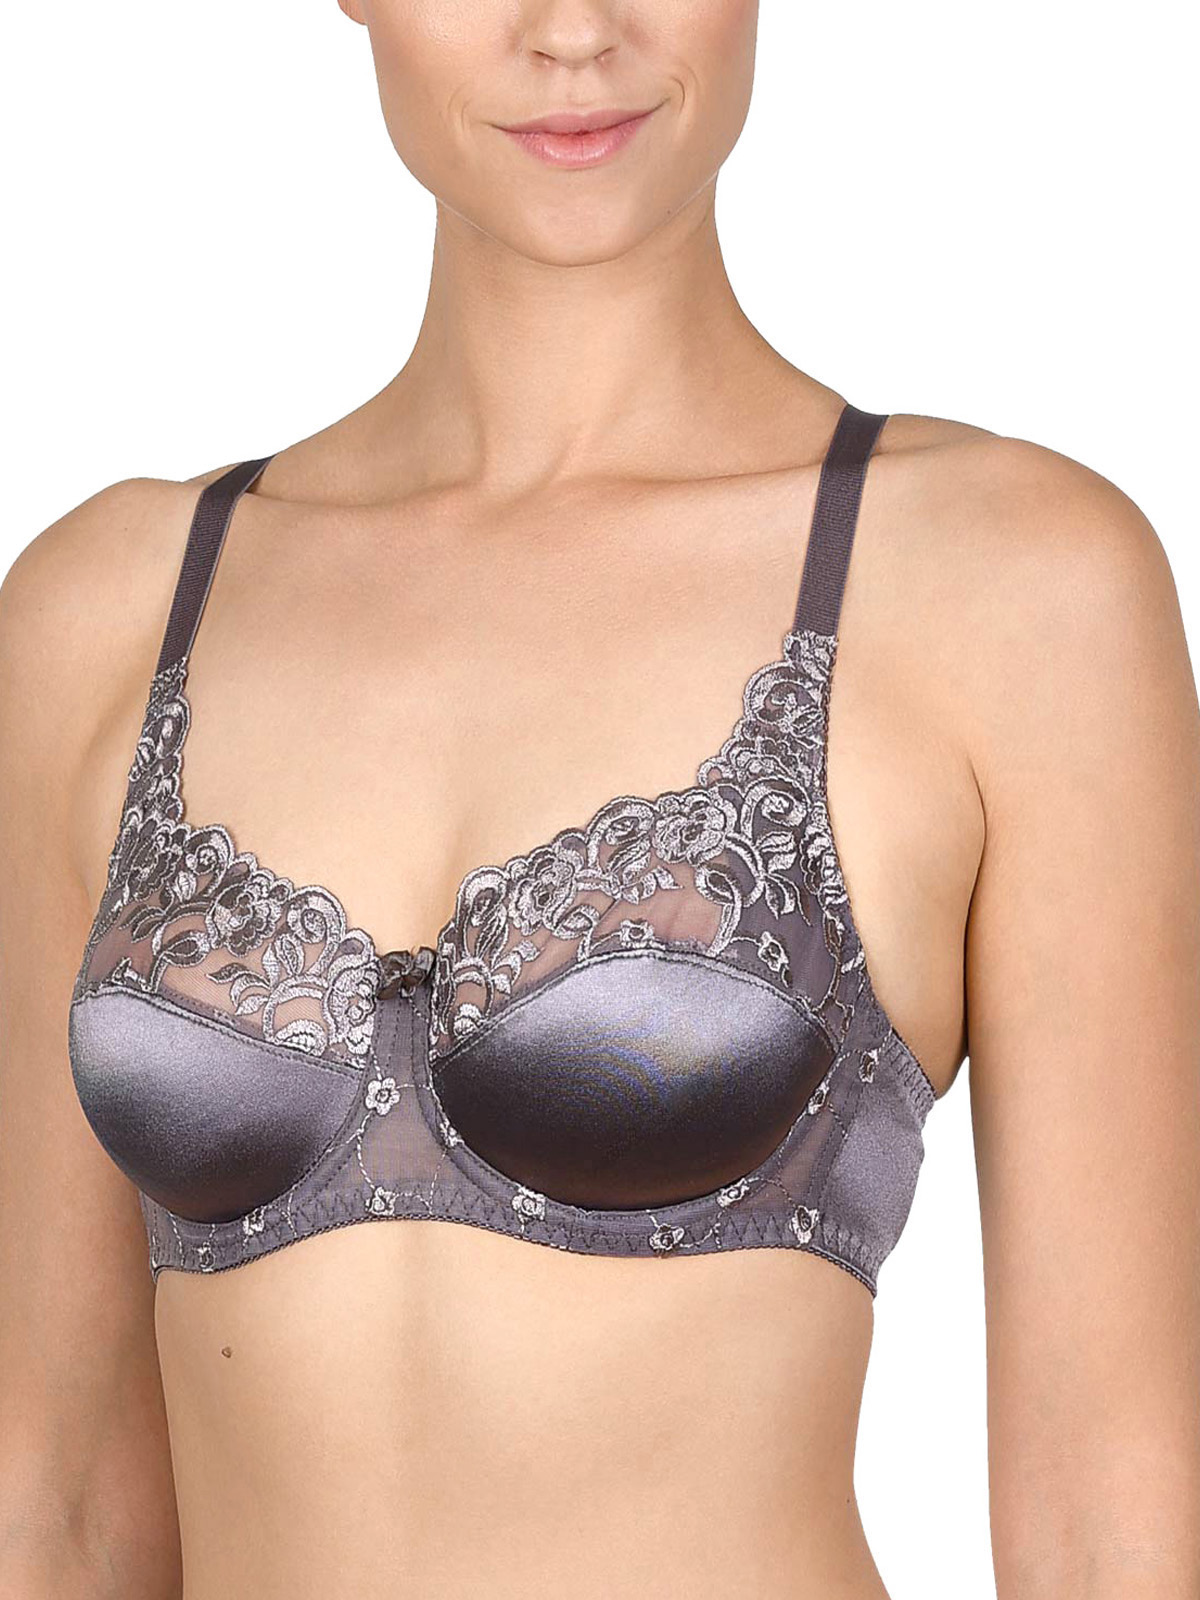 Naturana Underwired Satin Lace Full Cup Everday Bra Nepal